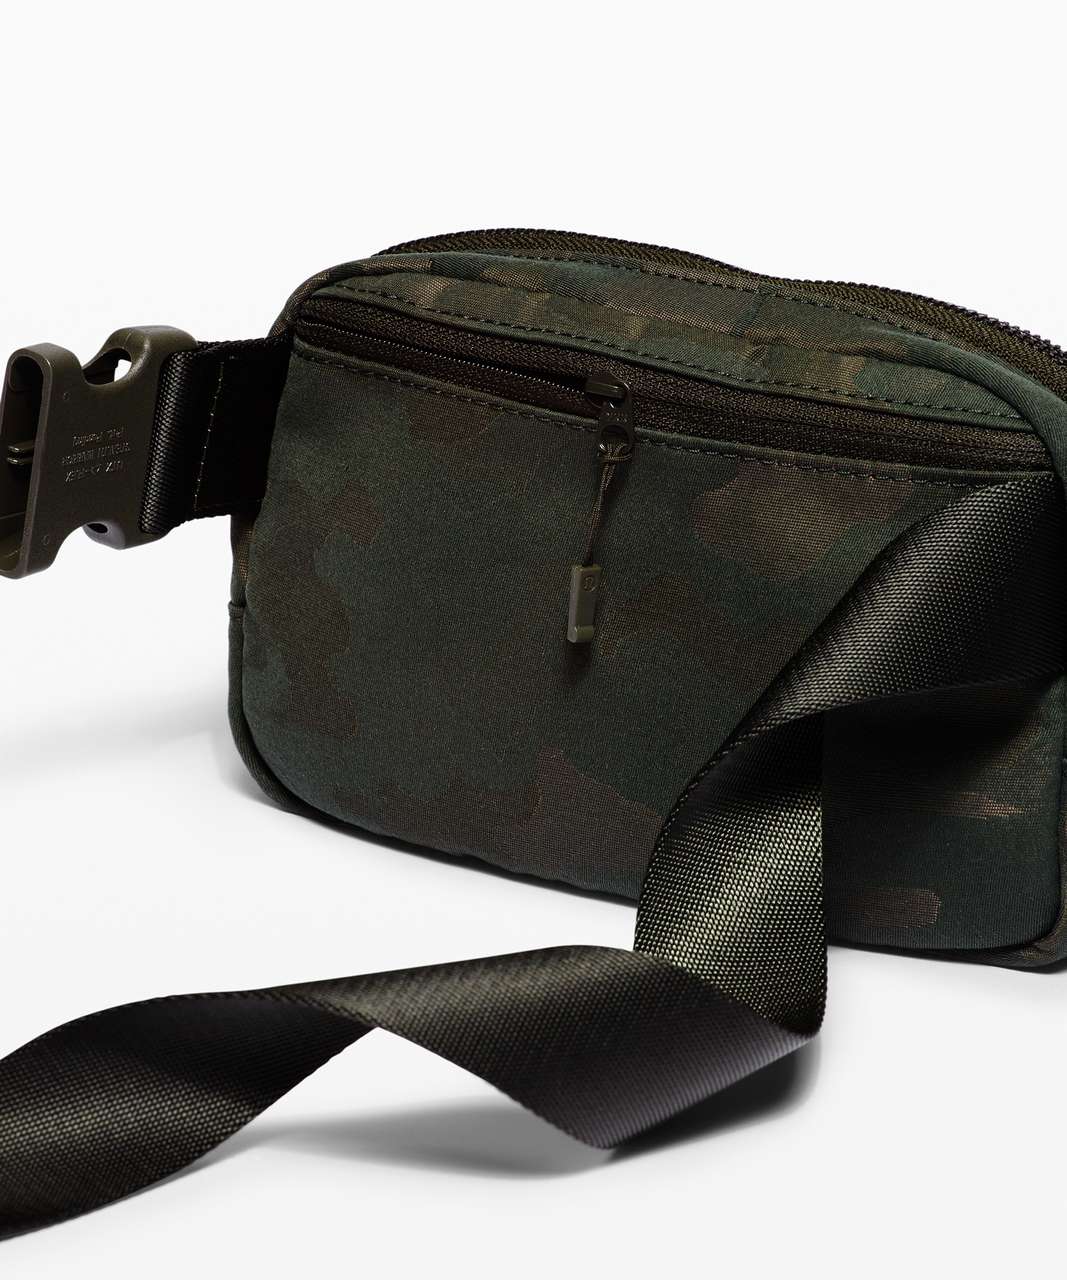 Lululemon Everywhere Belt Bag Heritage Camo Jacquard Max Dark Olive Sargent  Green in Waterproof Polyester with Silver-tone - US